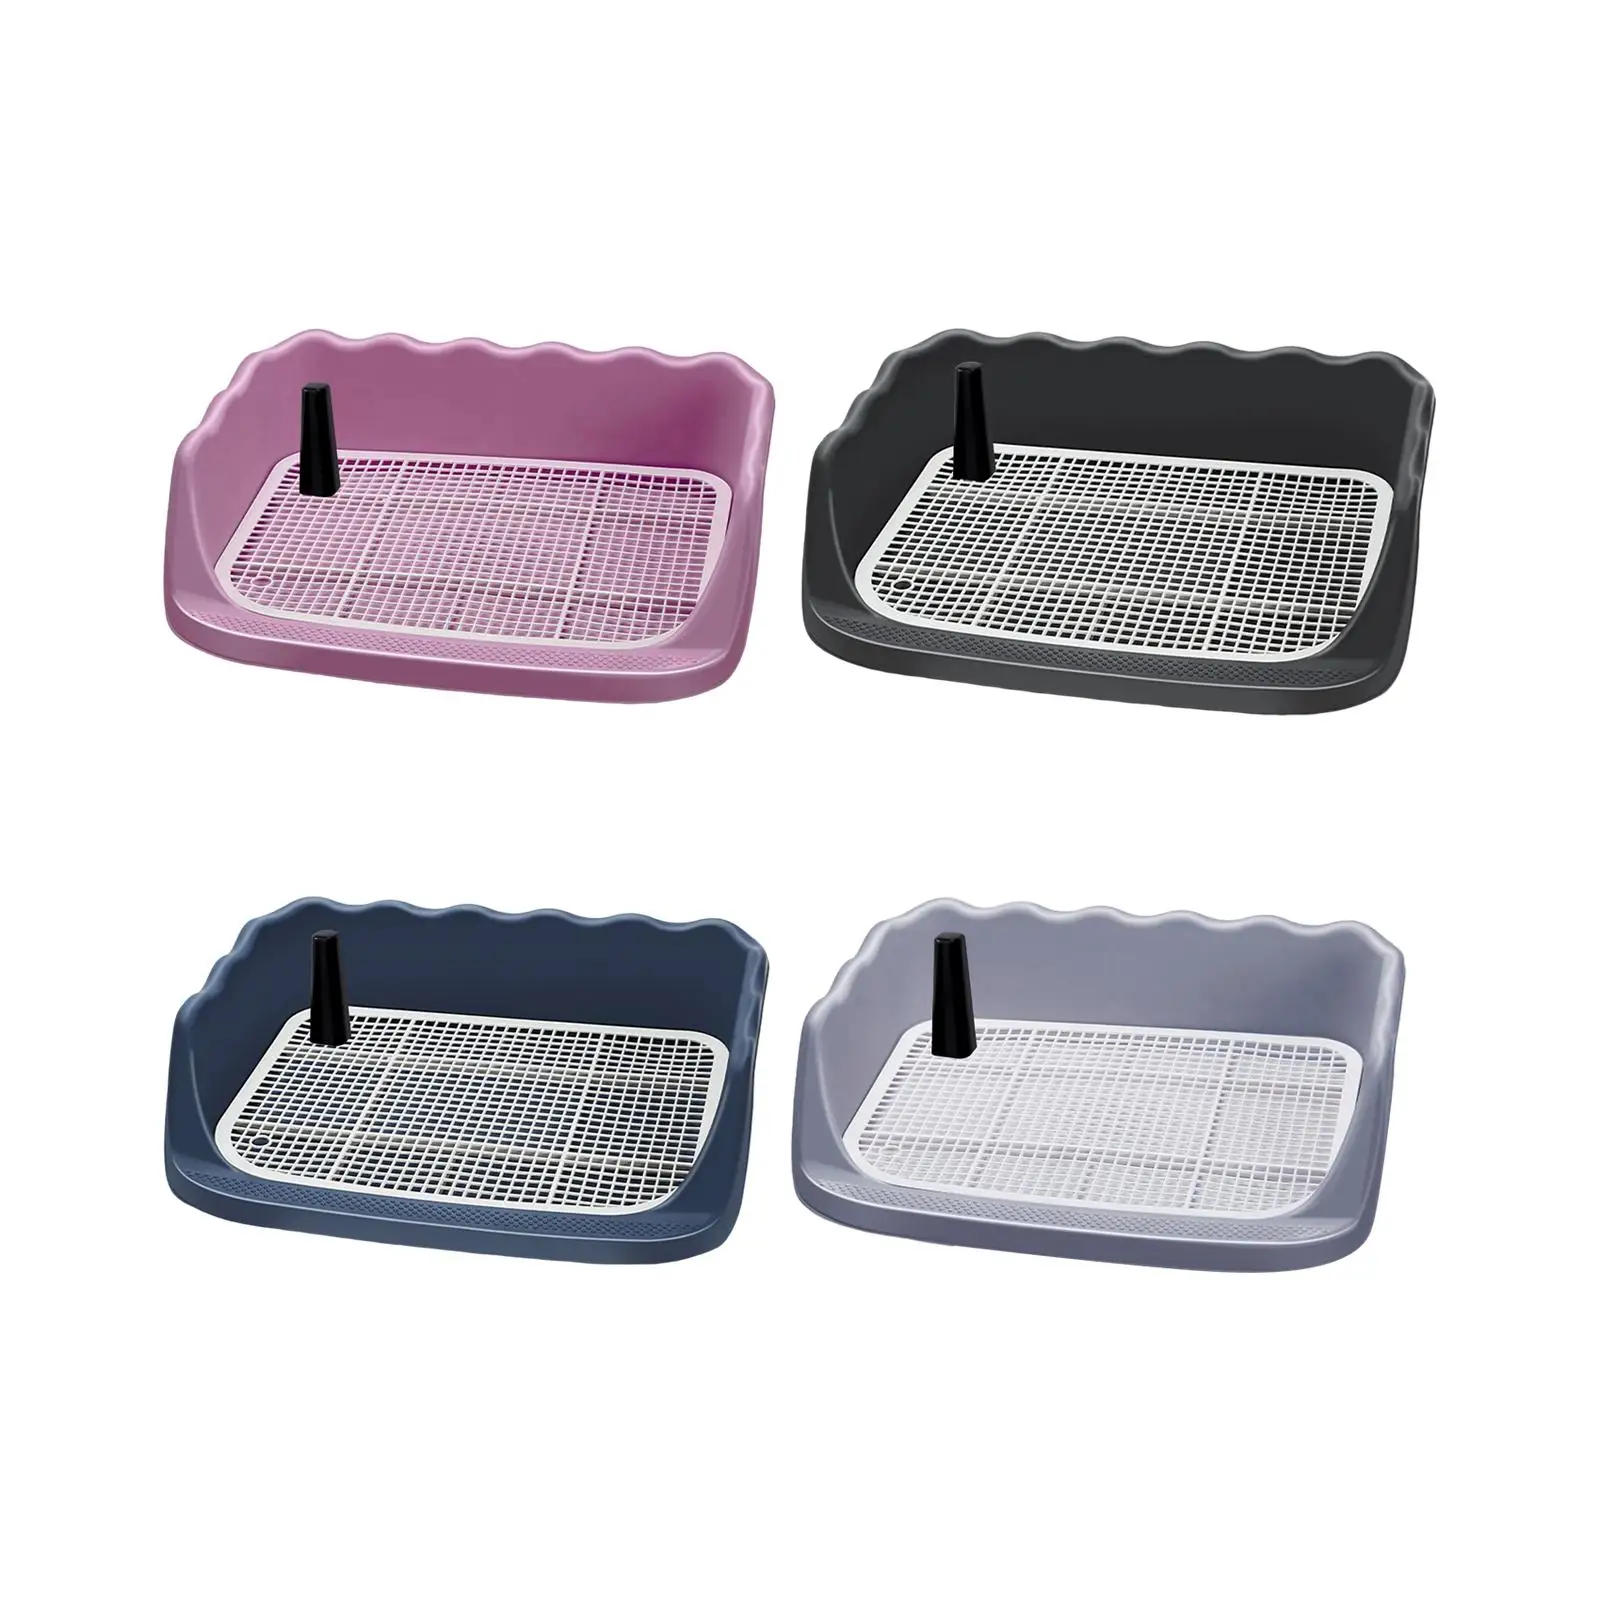 Dog Potty Tray Puppy Training Tray Keep Paws and Floors Clean Pee Pad Holder